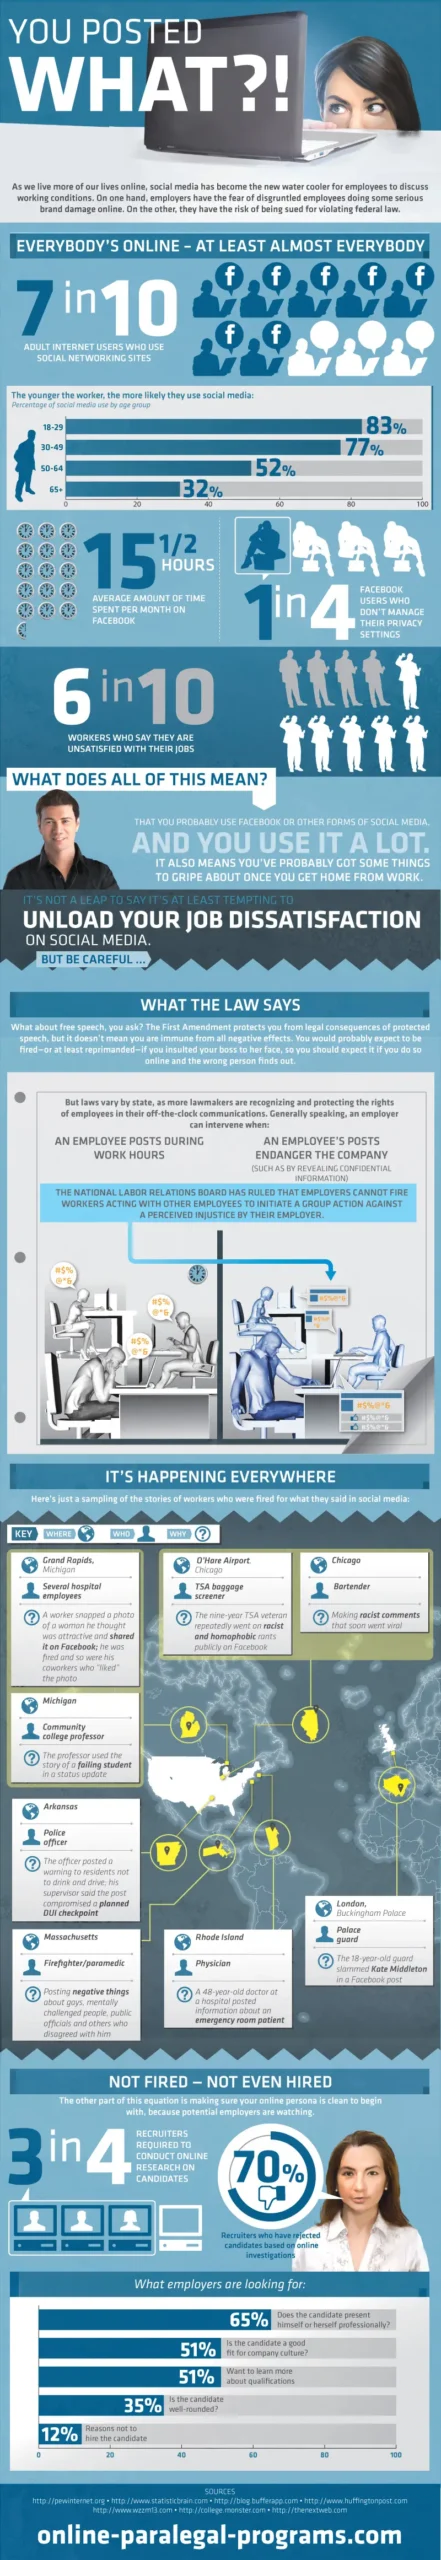 You Posted WHAT On Facebook? (InfoGraphic)
